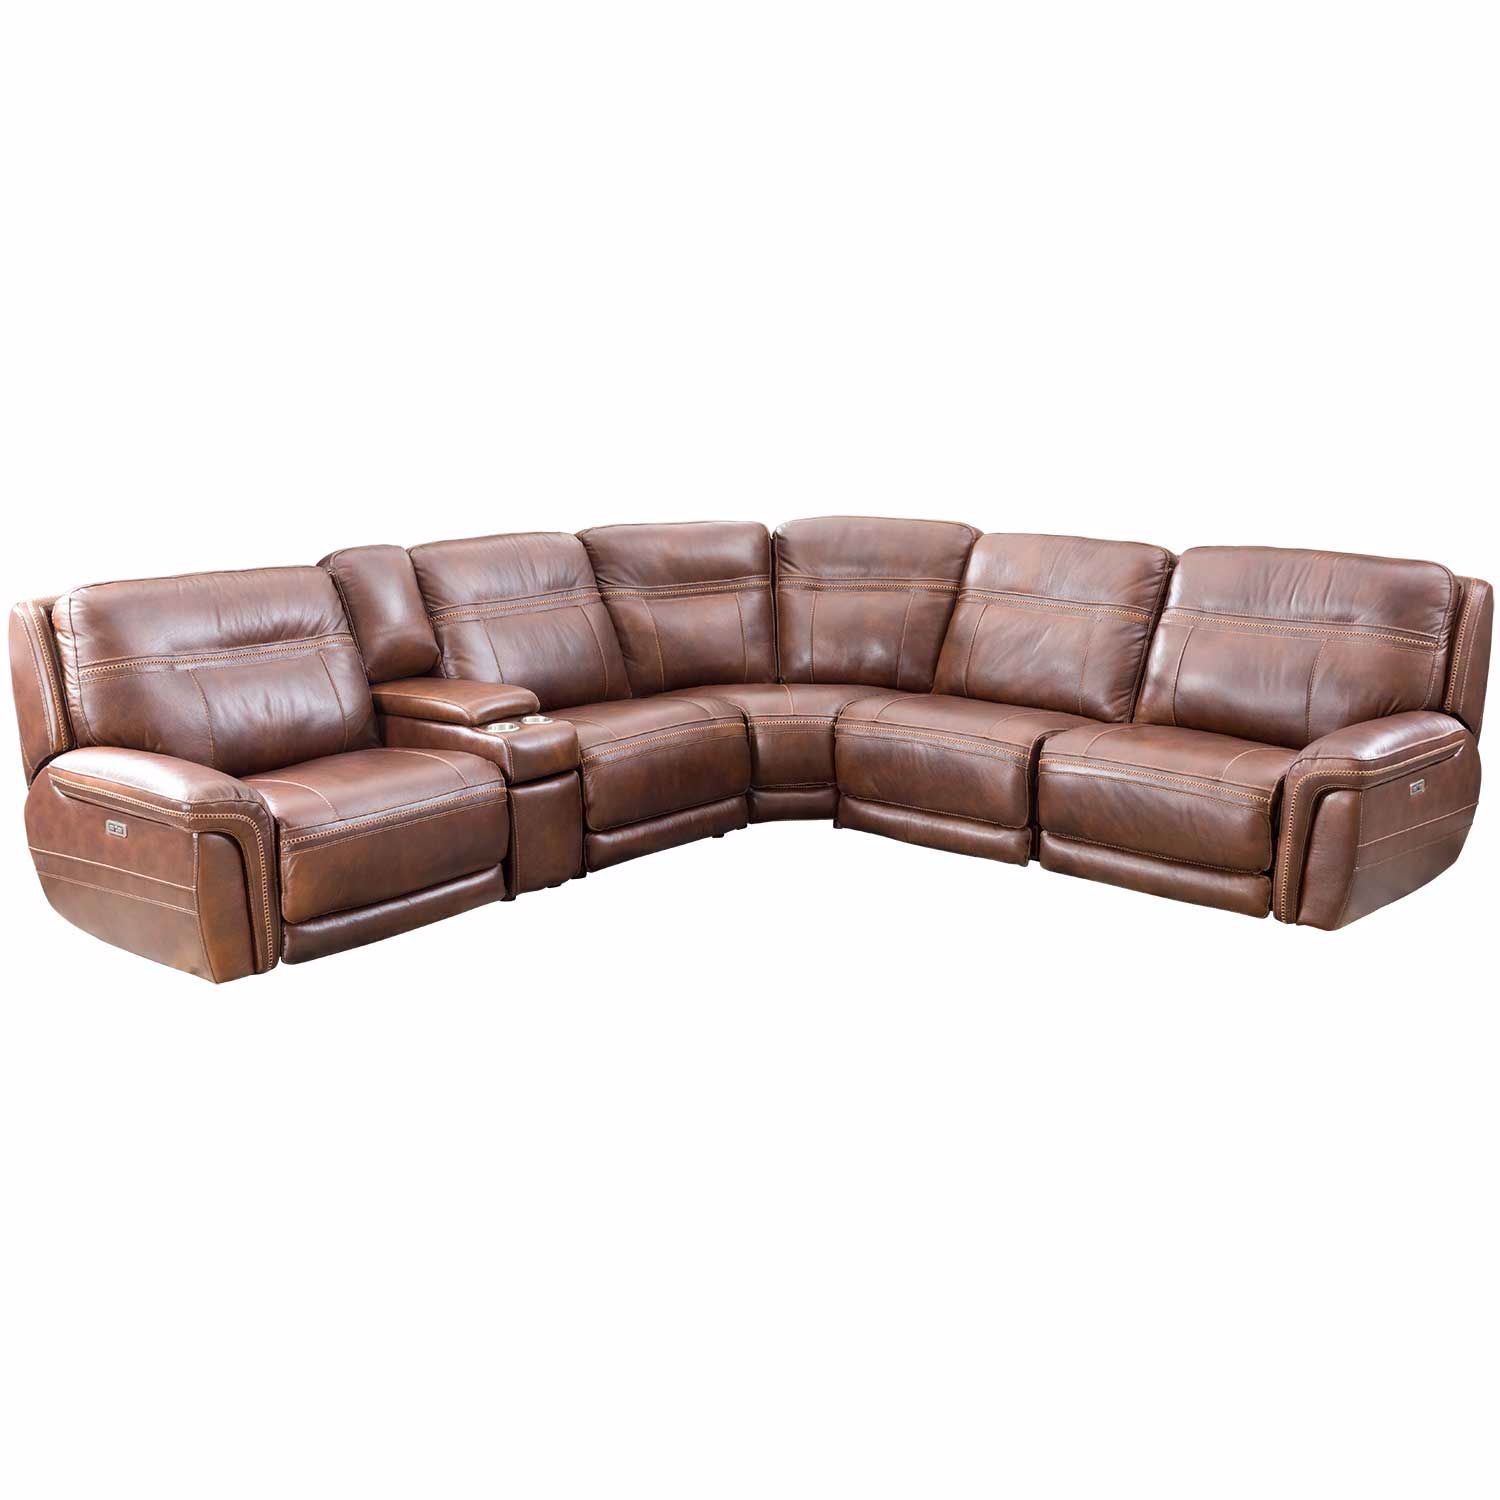 0115844 Dean 6 Piece Leather Power Reclining Sectional With Adjustable Headrests 